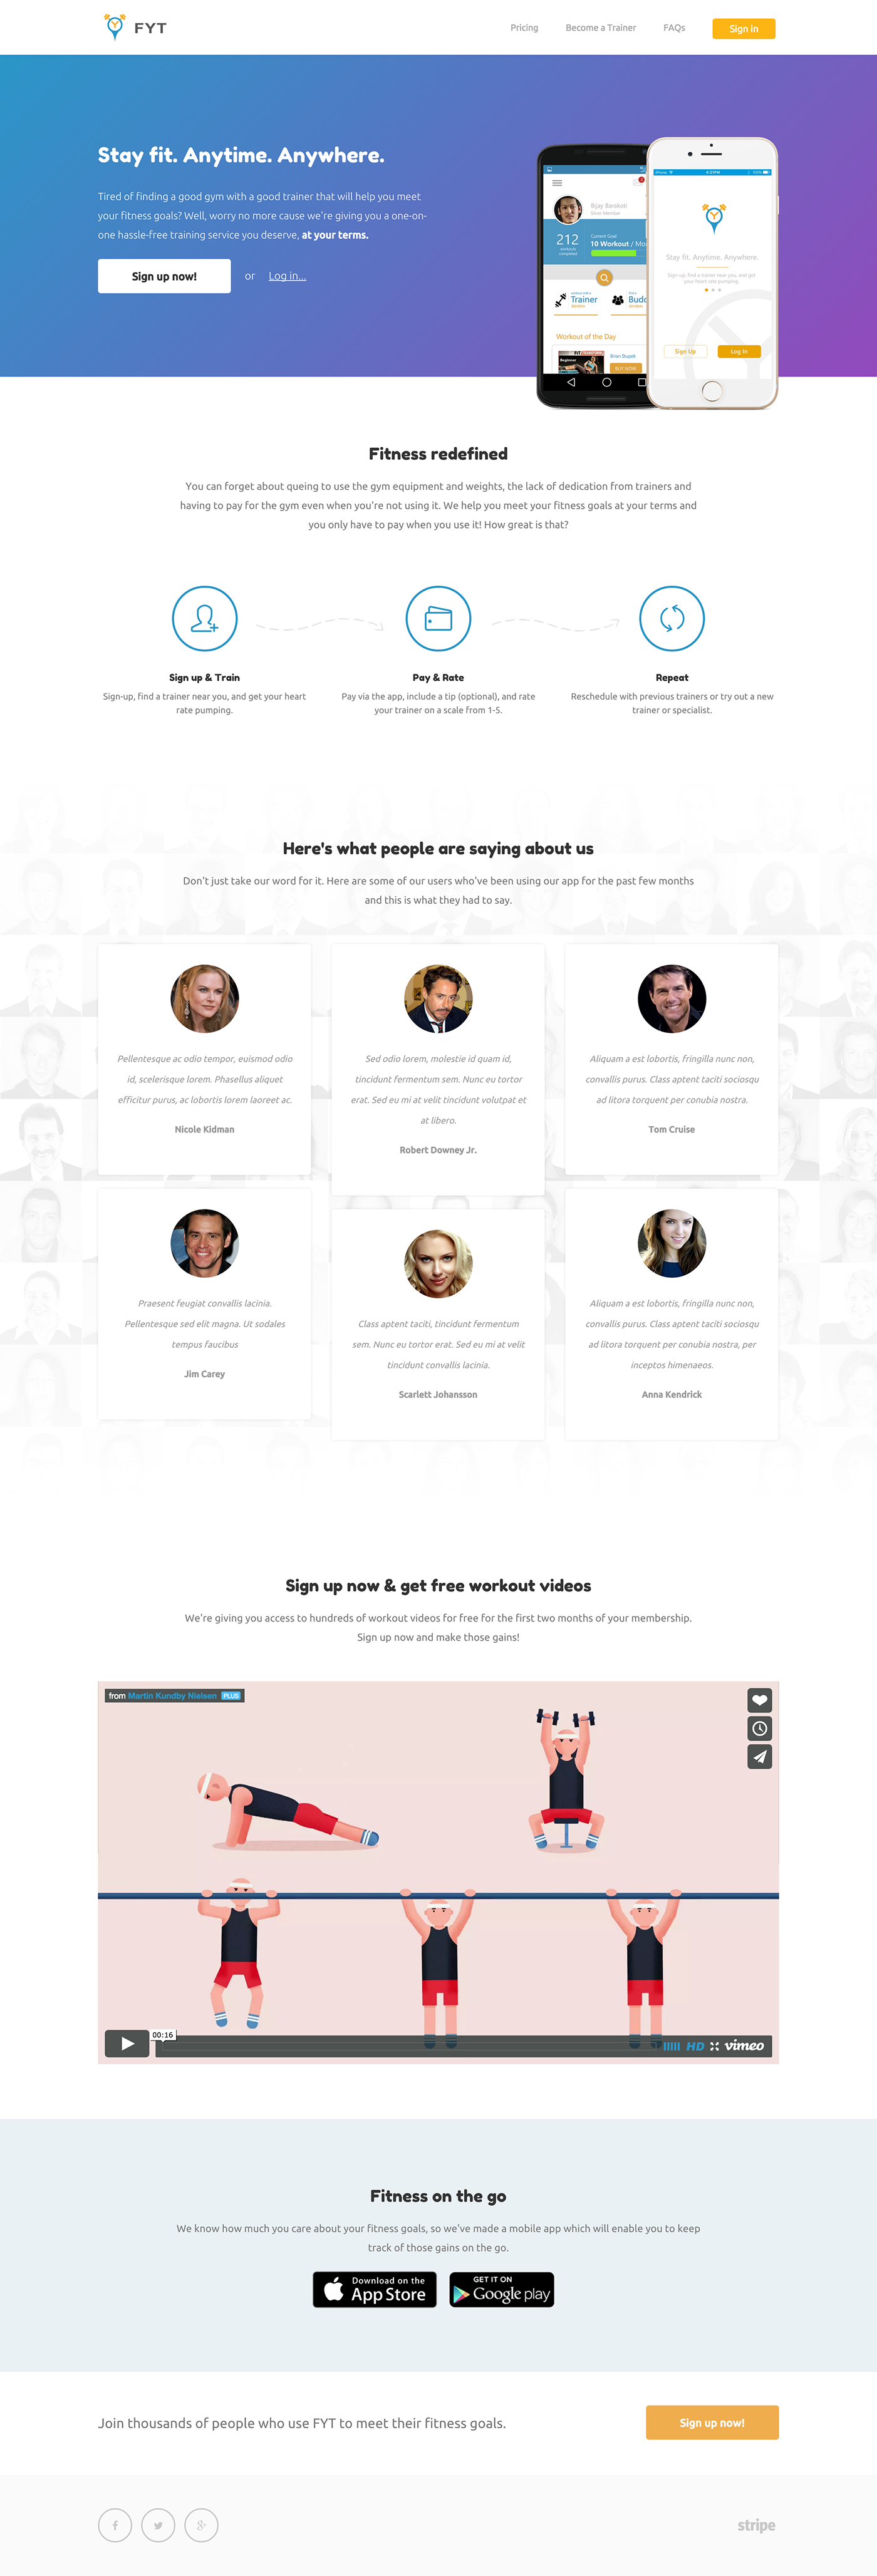 Responsive landing page gradient background continuity